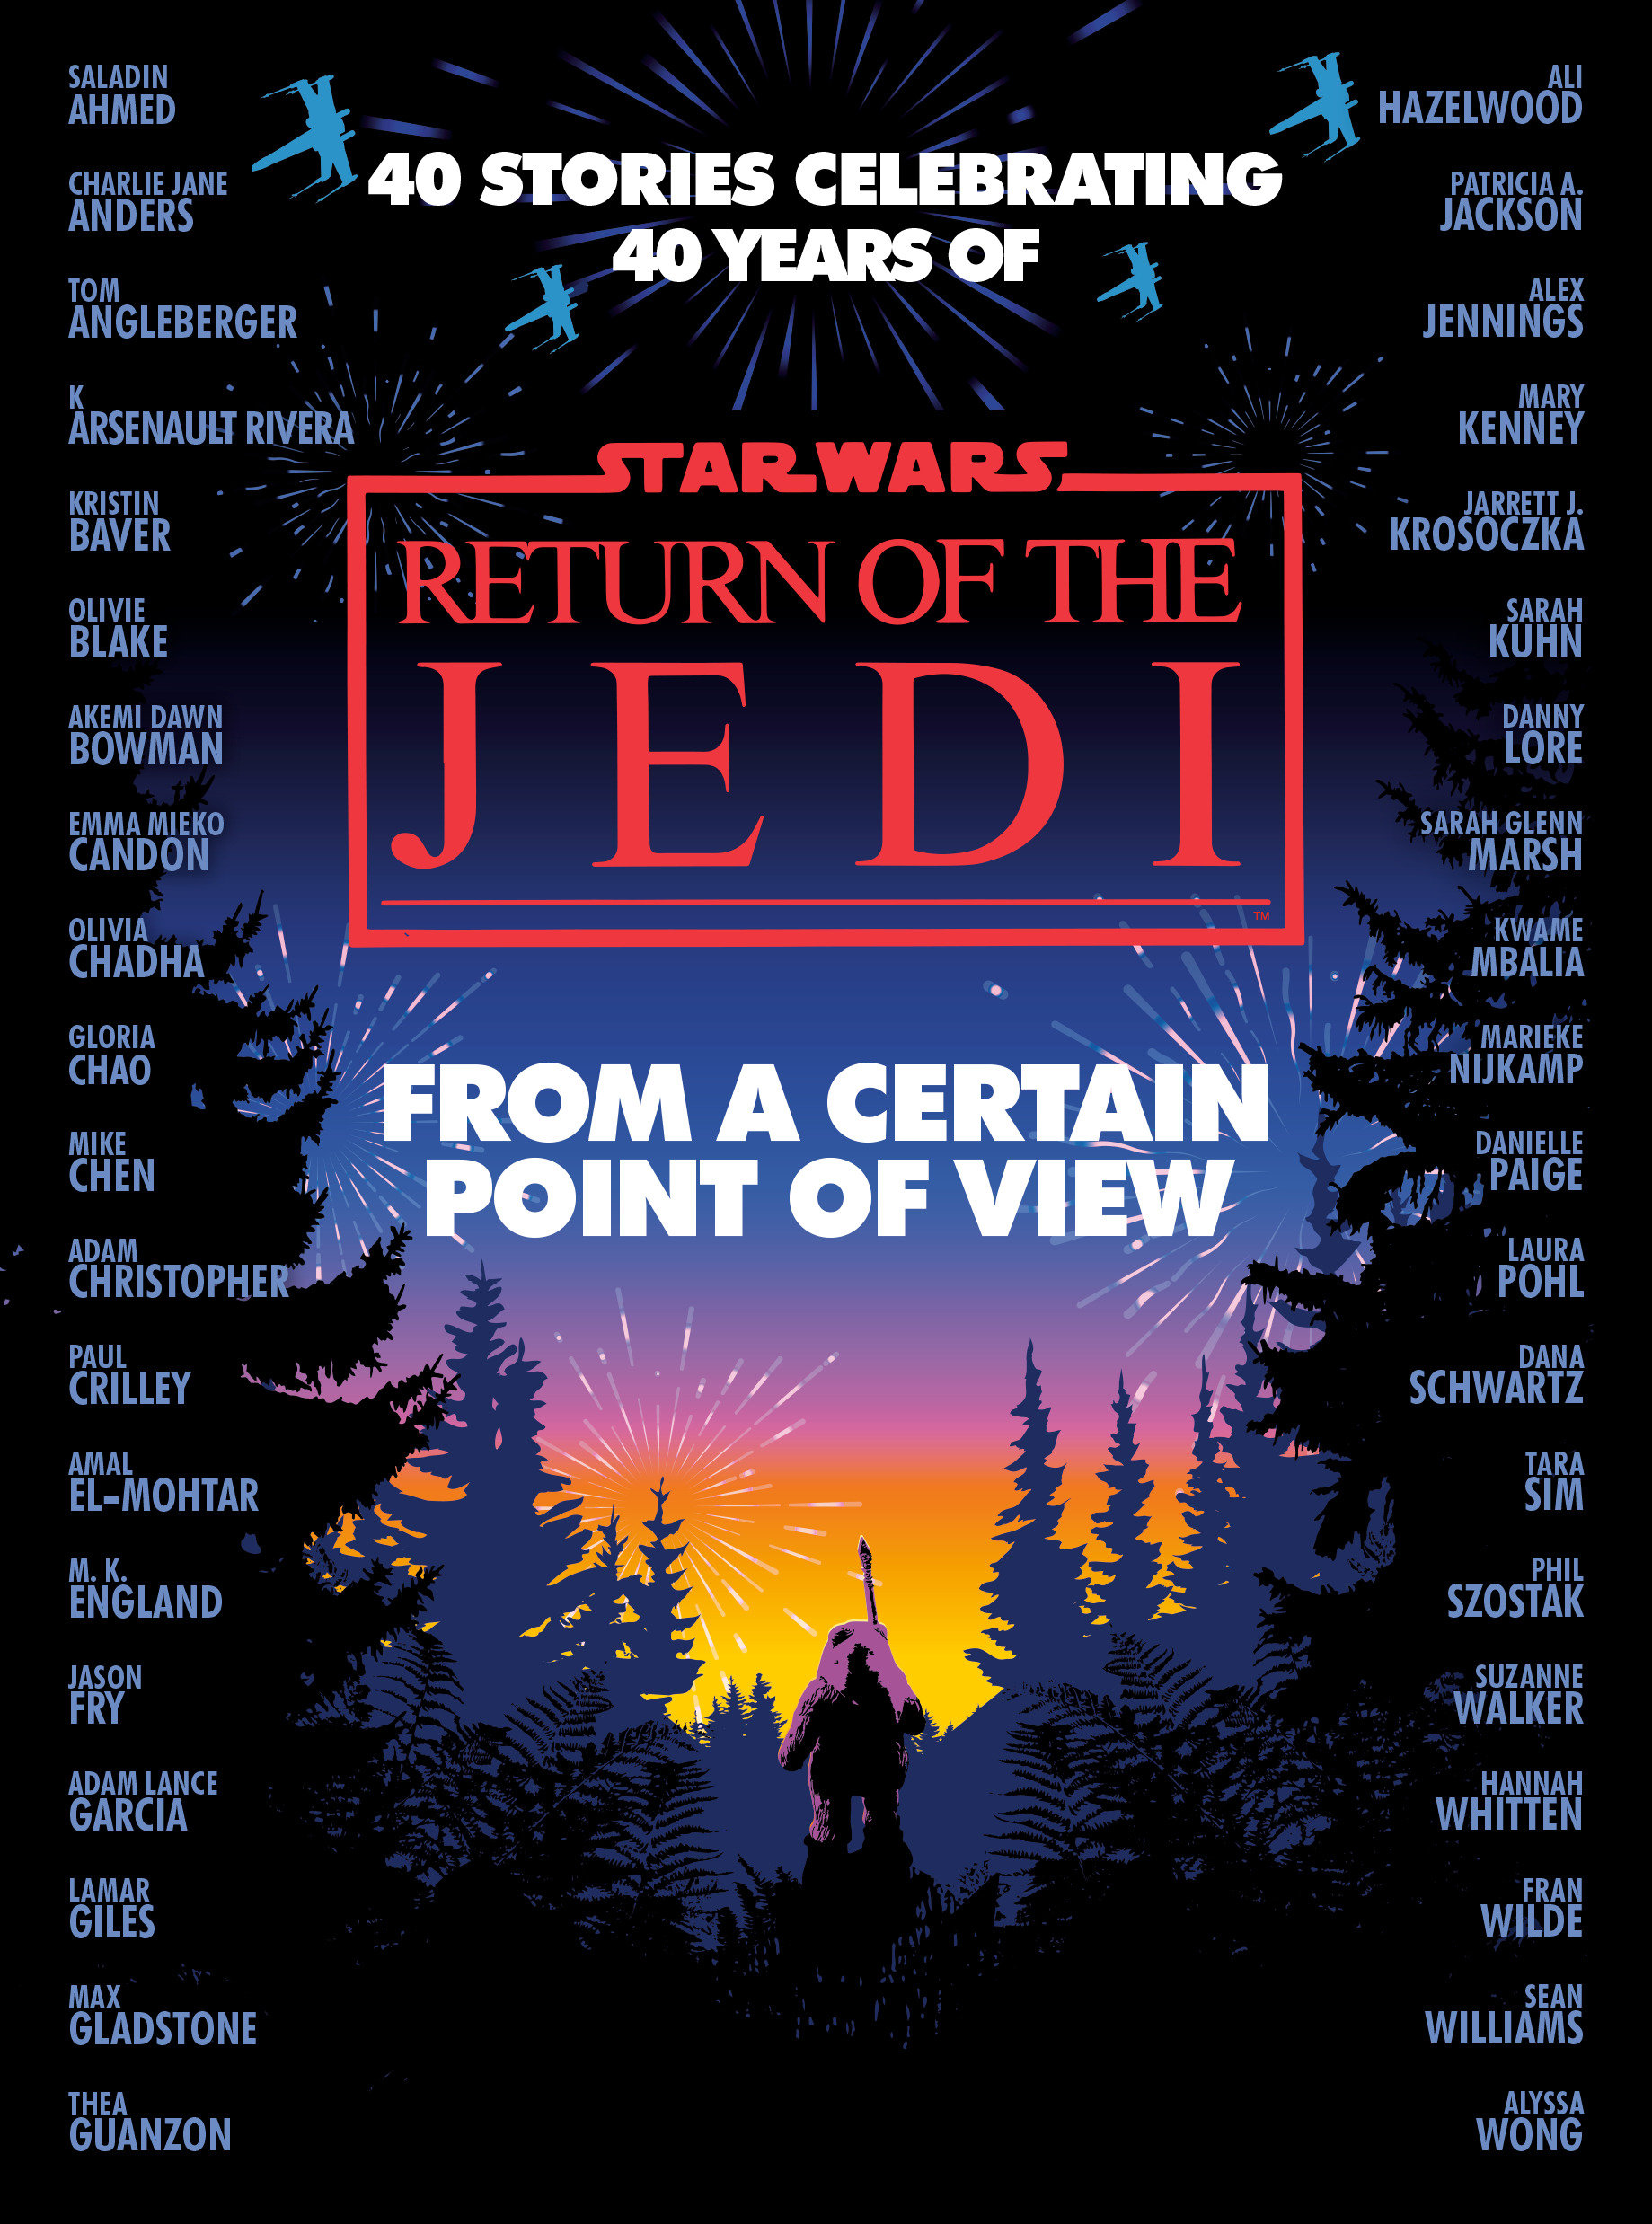 From a Certain Point of View: Return of the Jedi (Star Wars) Hardcover